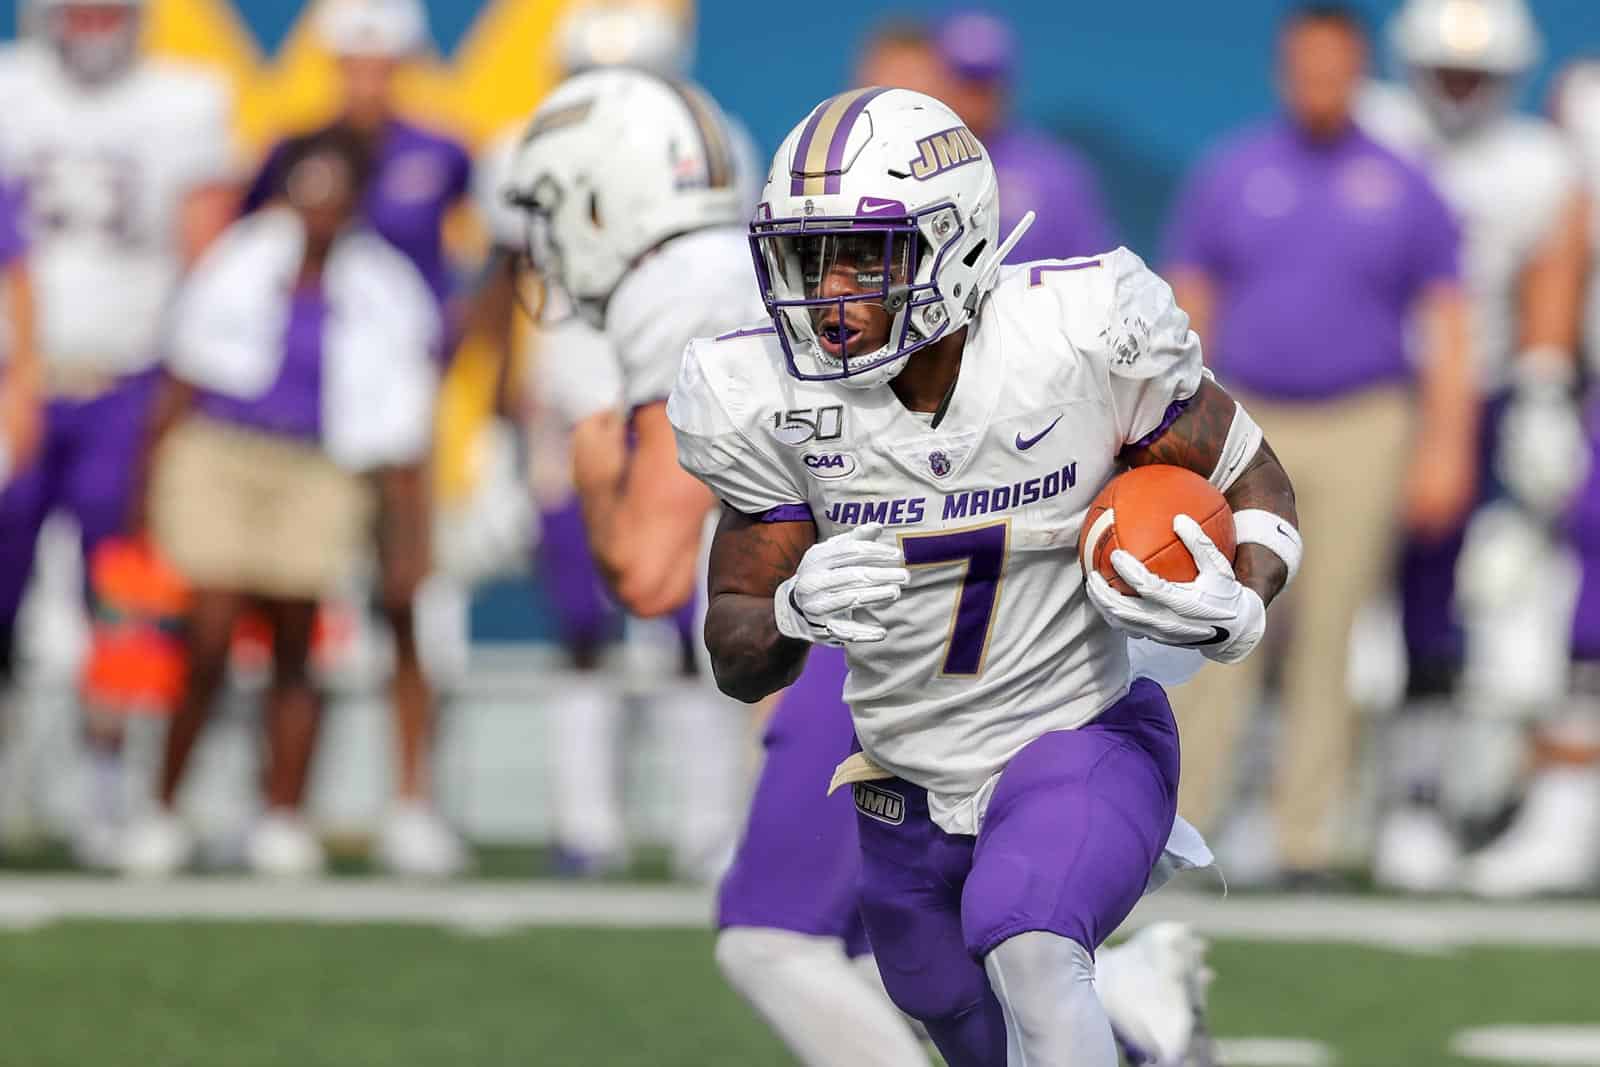 James Madison Football Schedule 2022 James Madison, Weber State Schedule 2021-22 Football Series